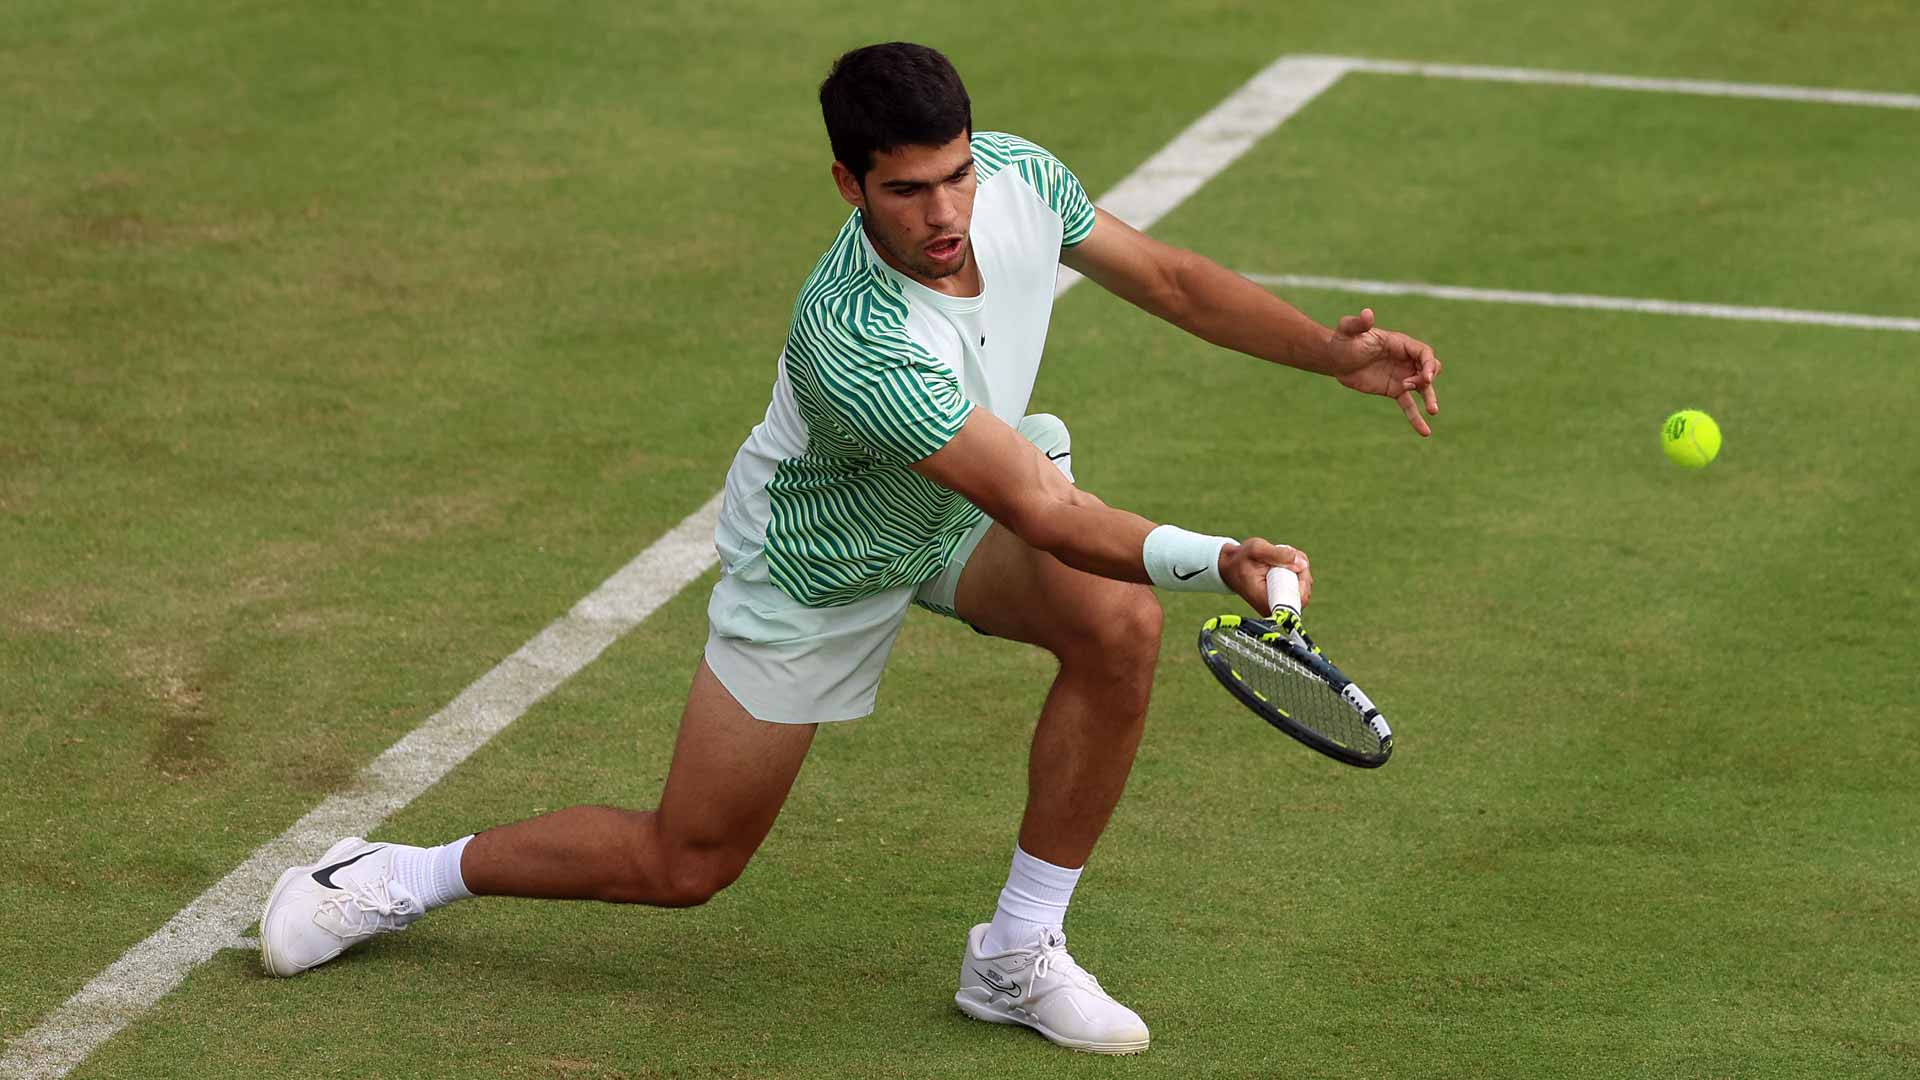 Carlos Alcaraz advanced to his first grass-court quarter-final on Thursday at The Queen's Club.